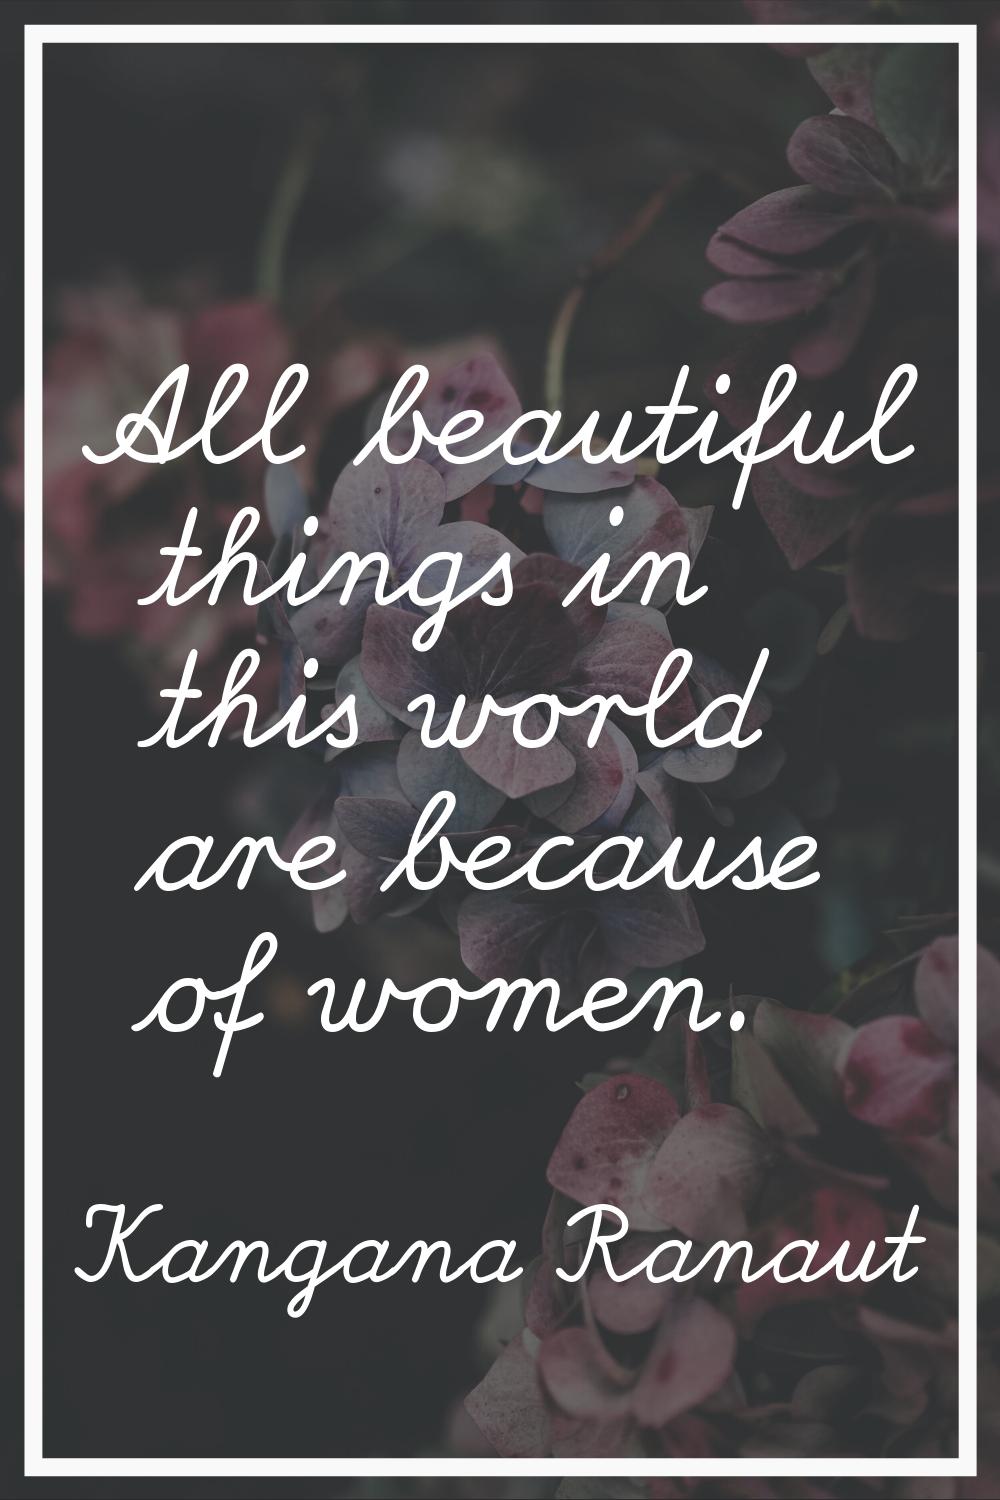 All beautiful things in this world are because of women.